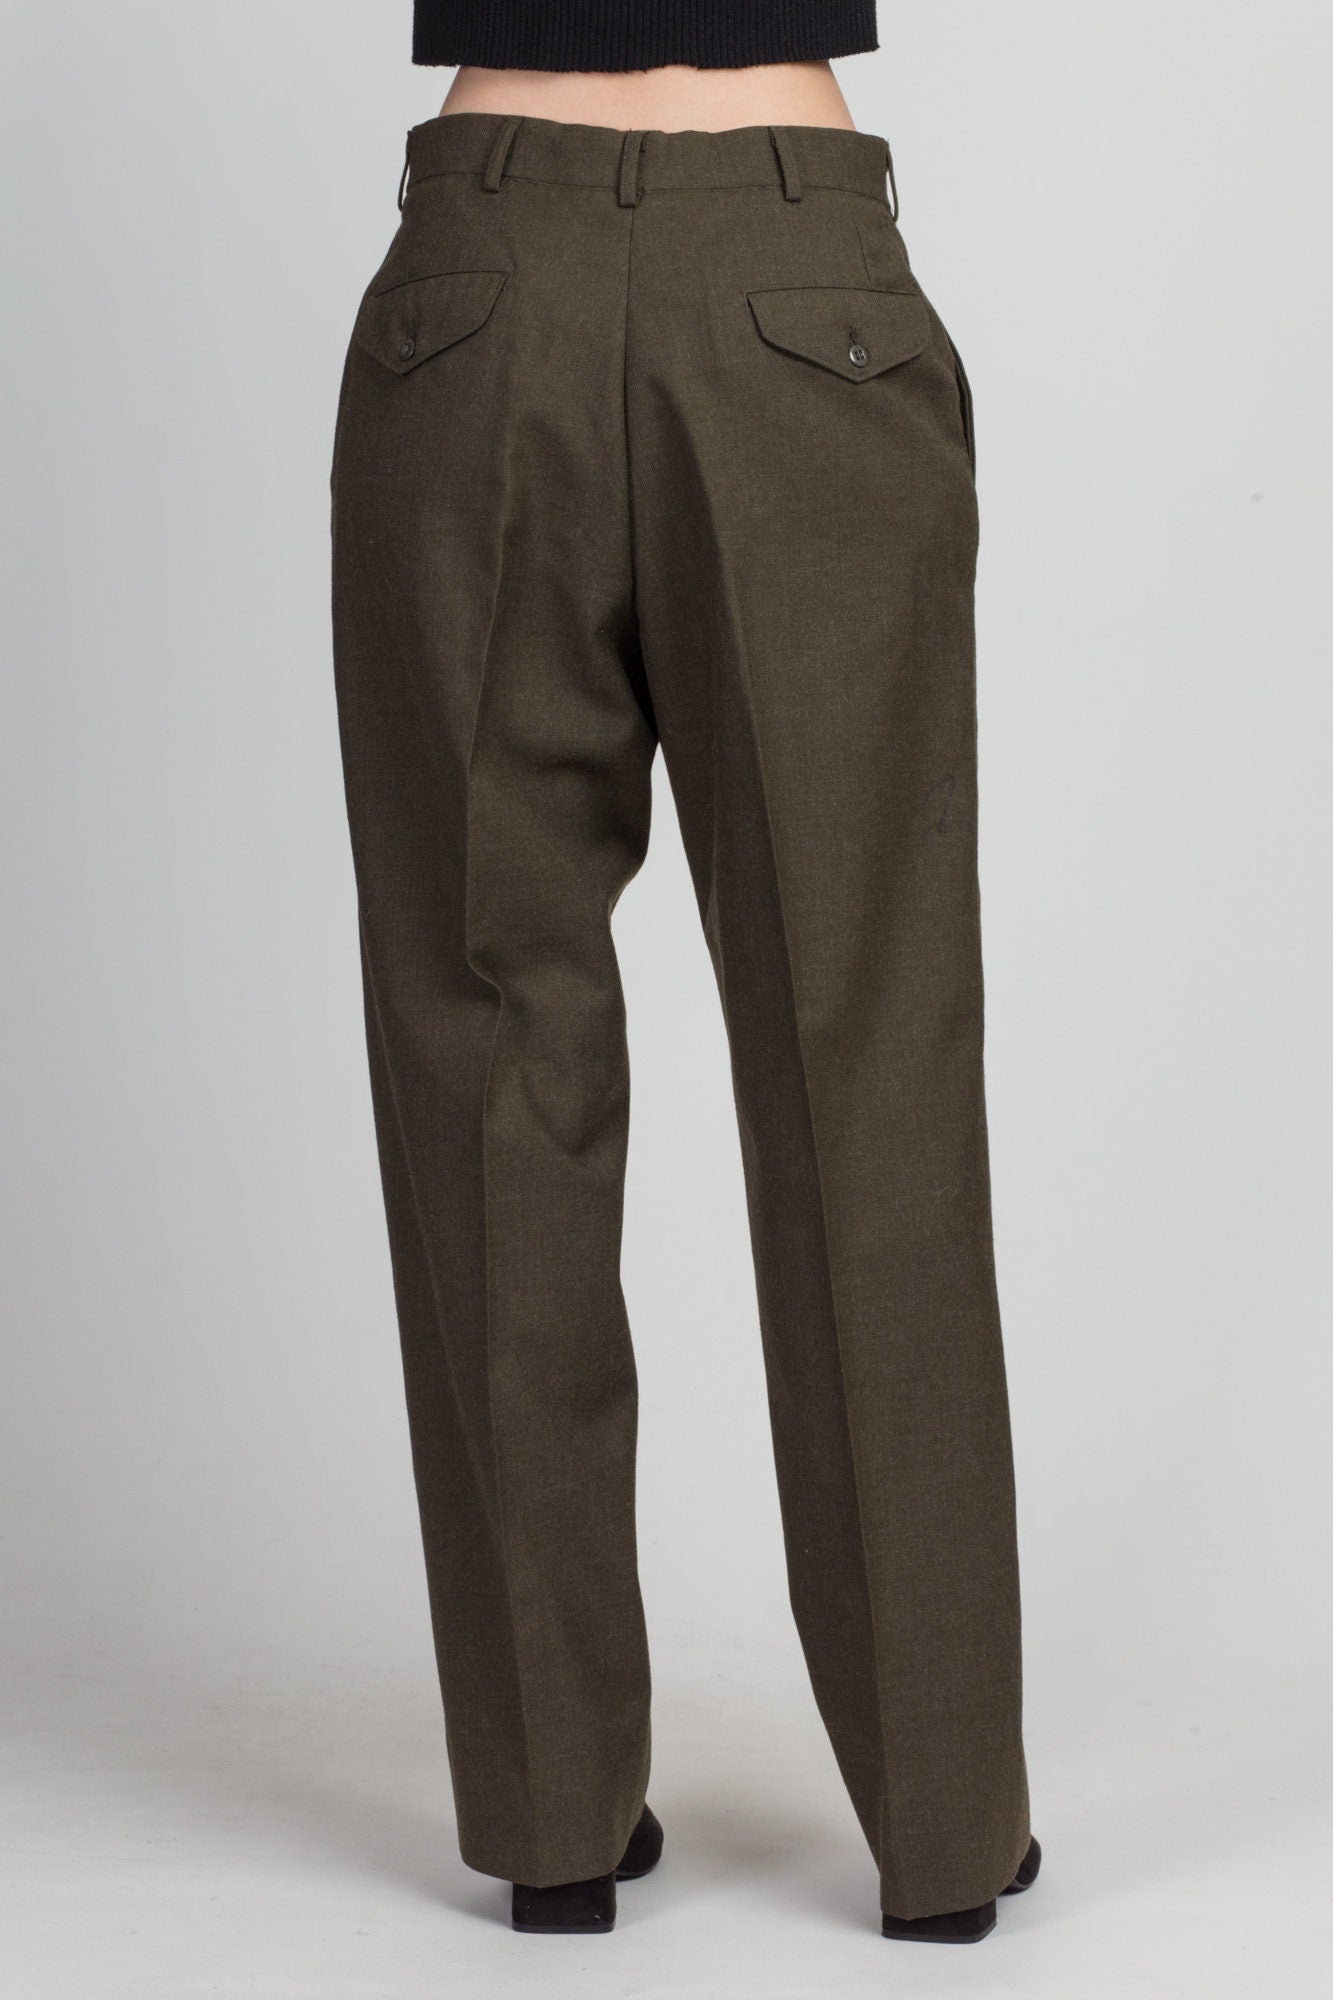 Vintage Olive Wool Men's Army Trousers - 31